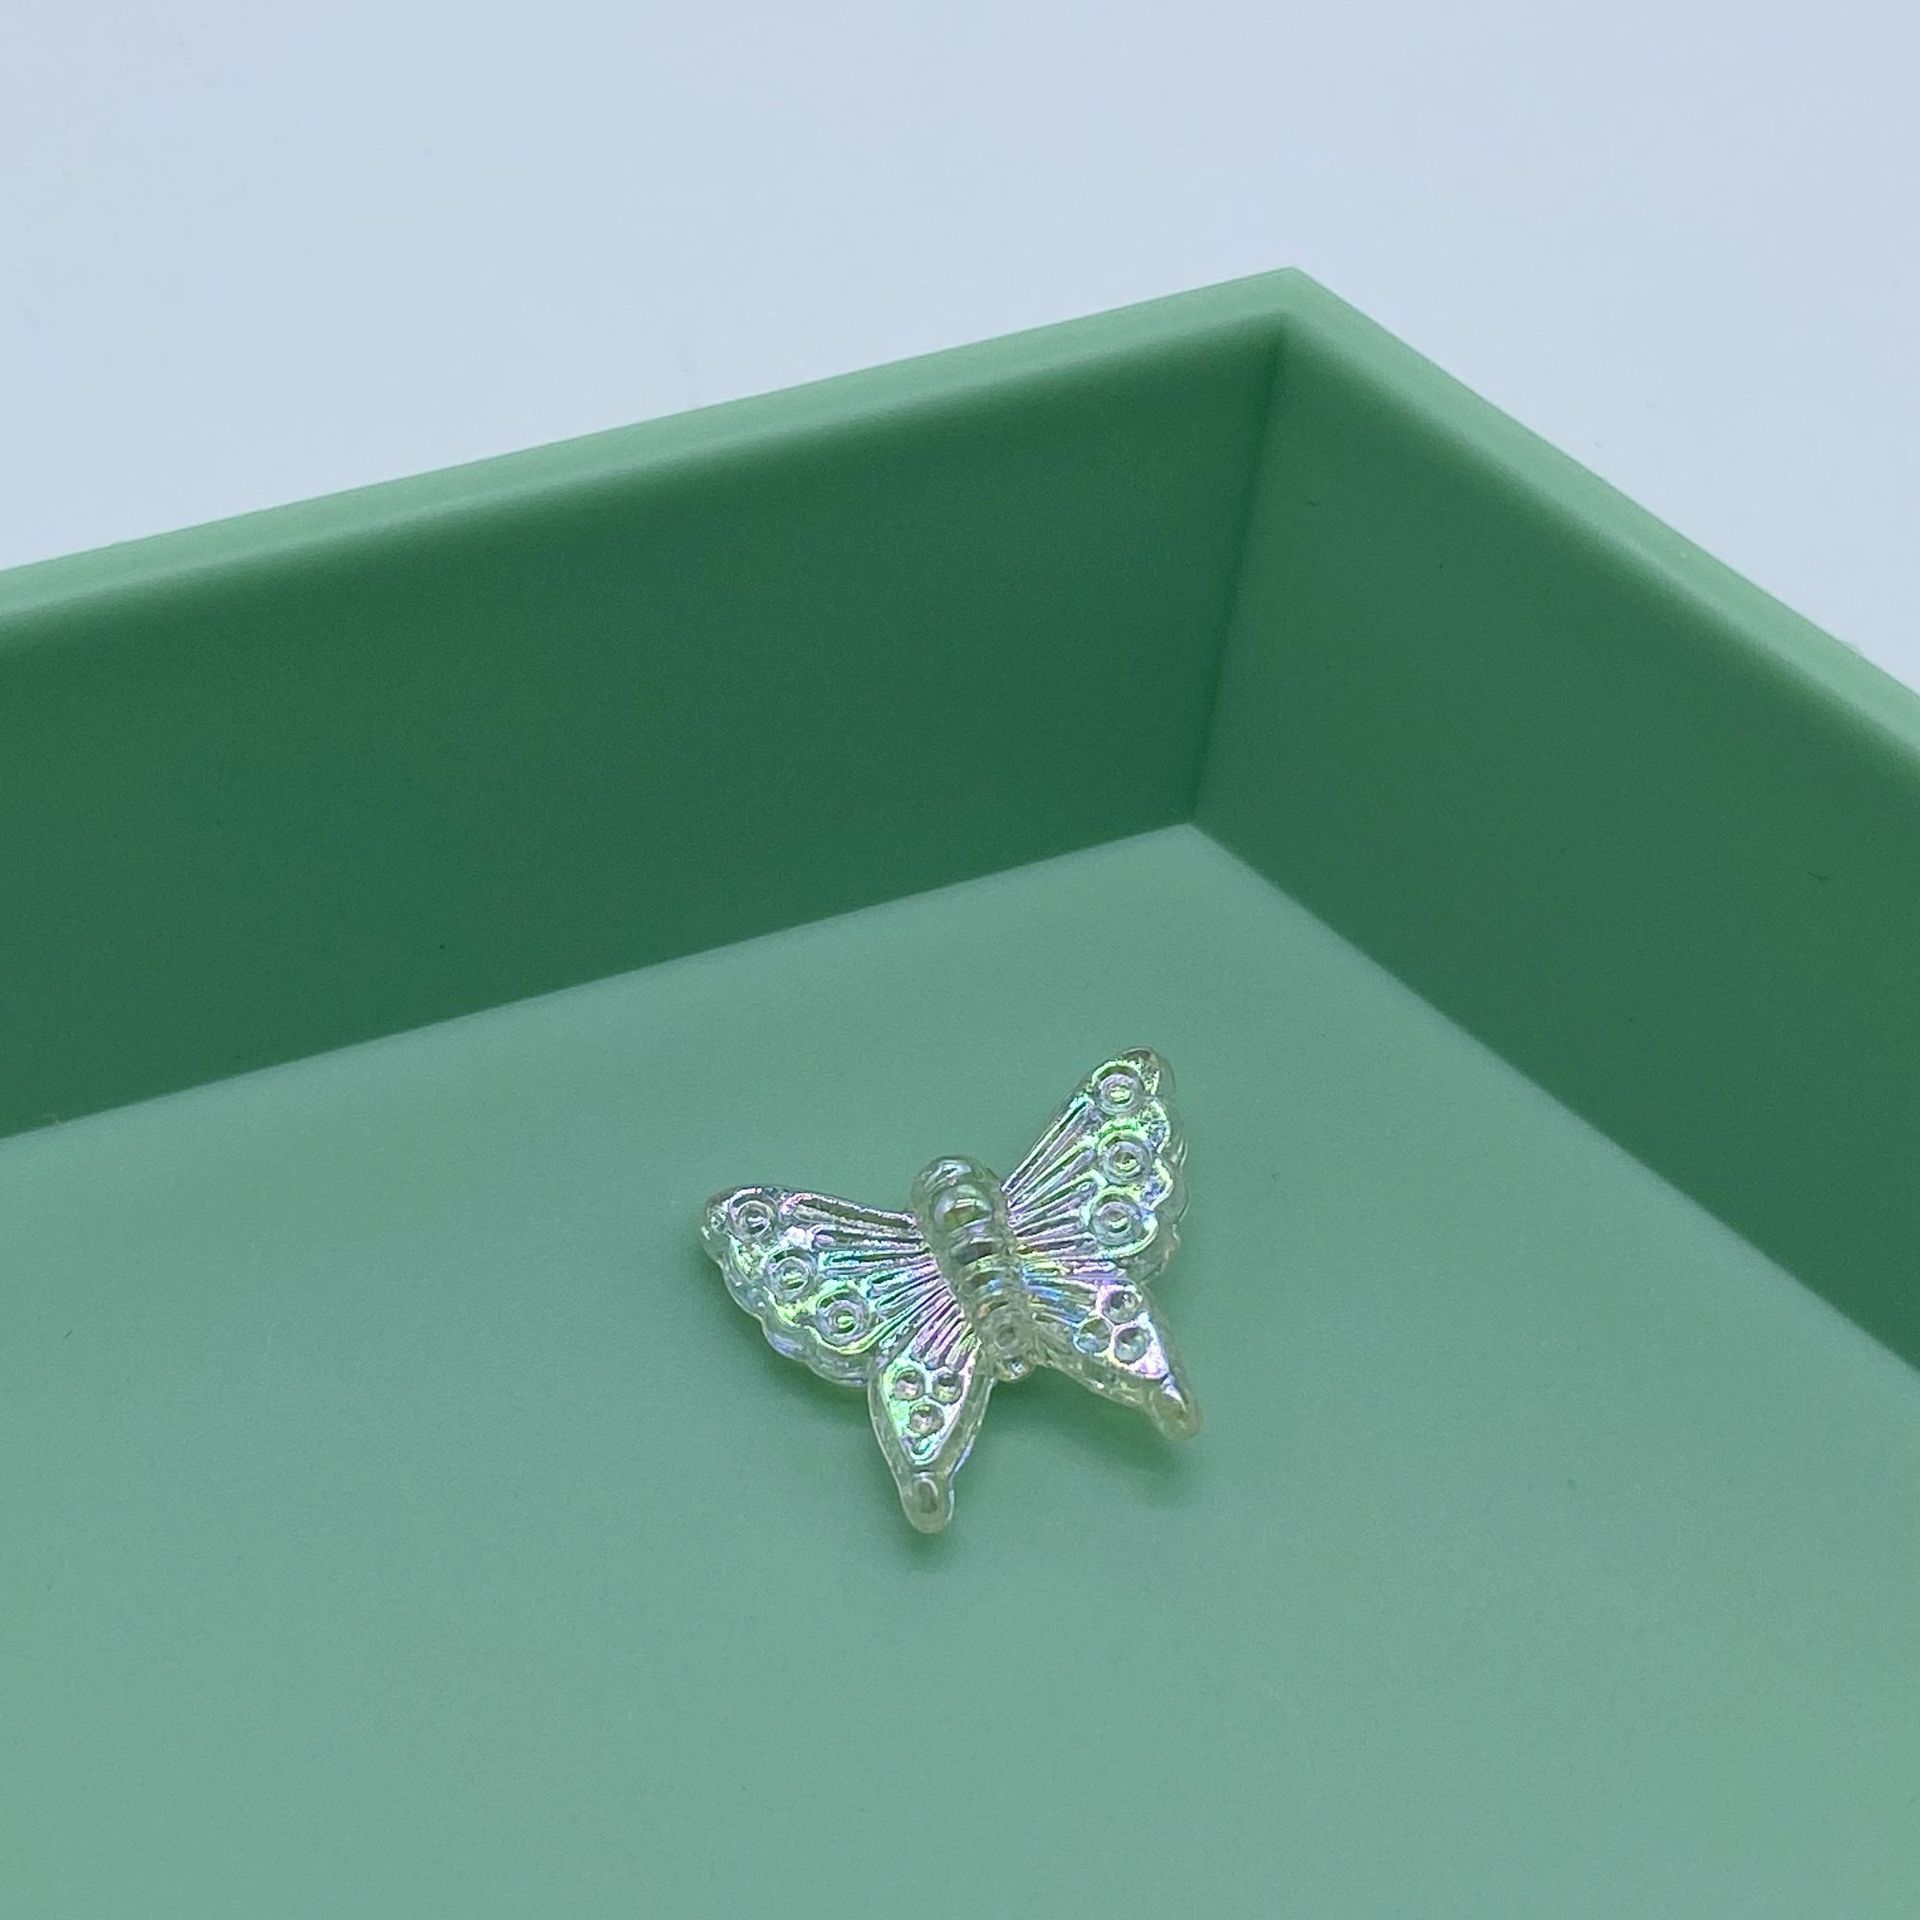 6:Small Butterfly, 13x16mm